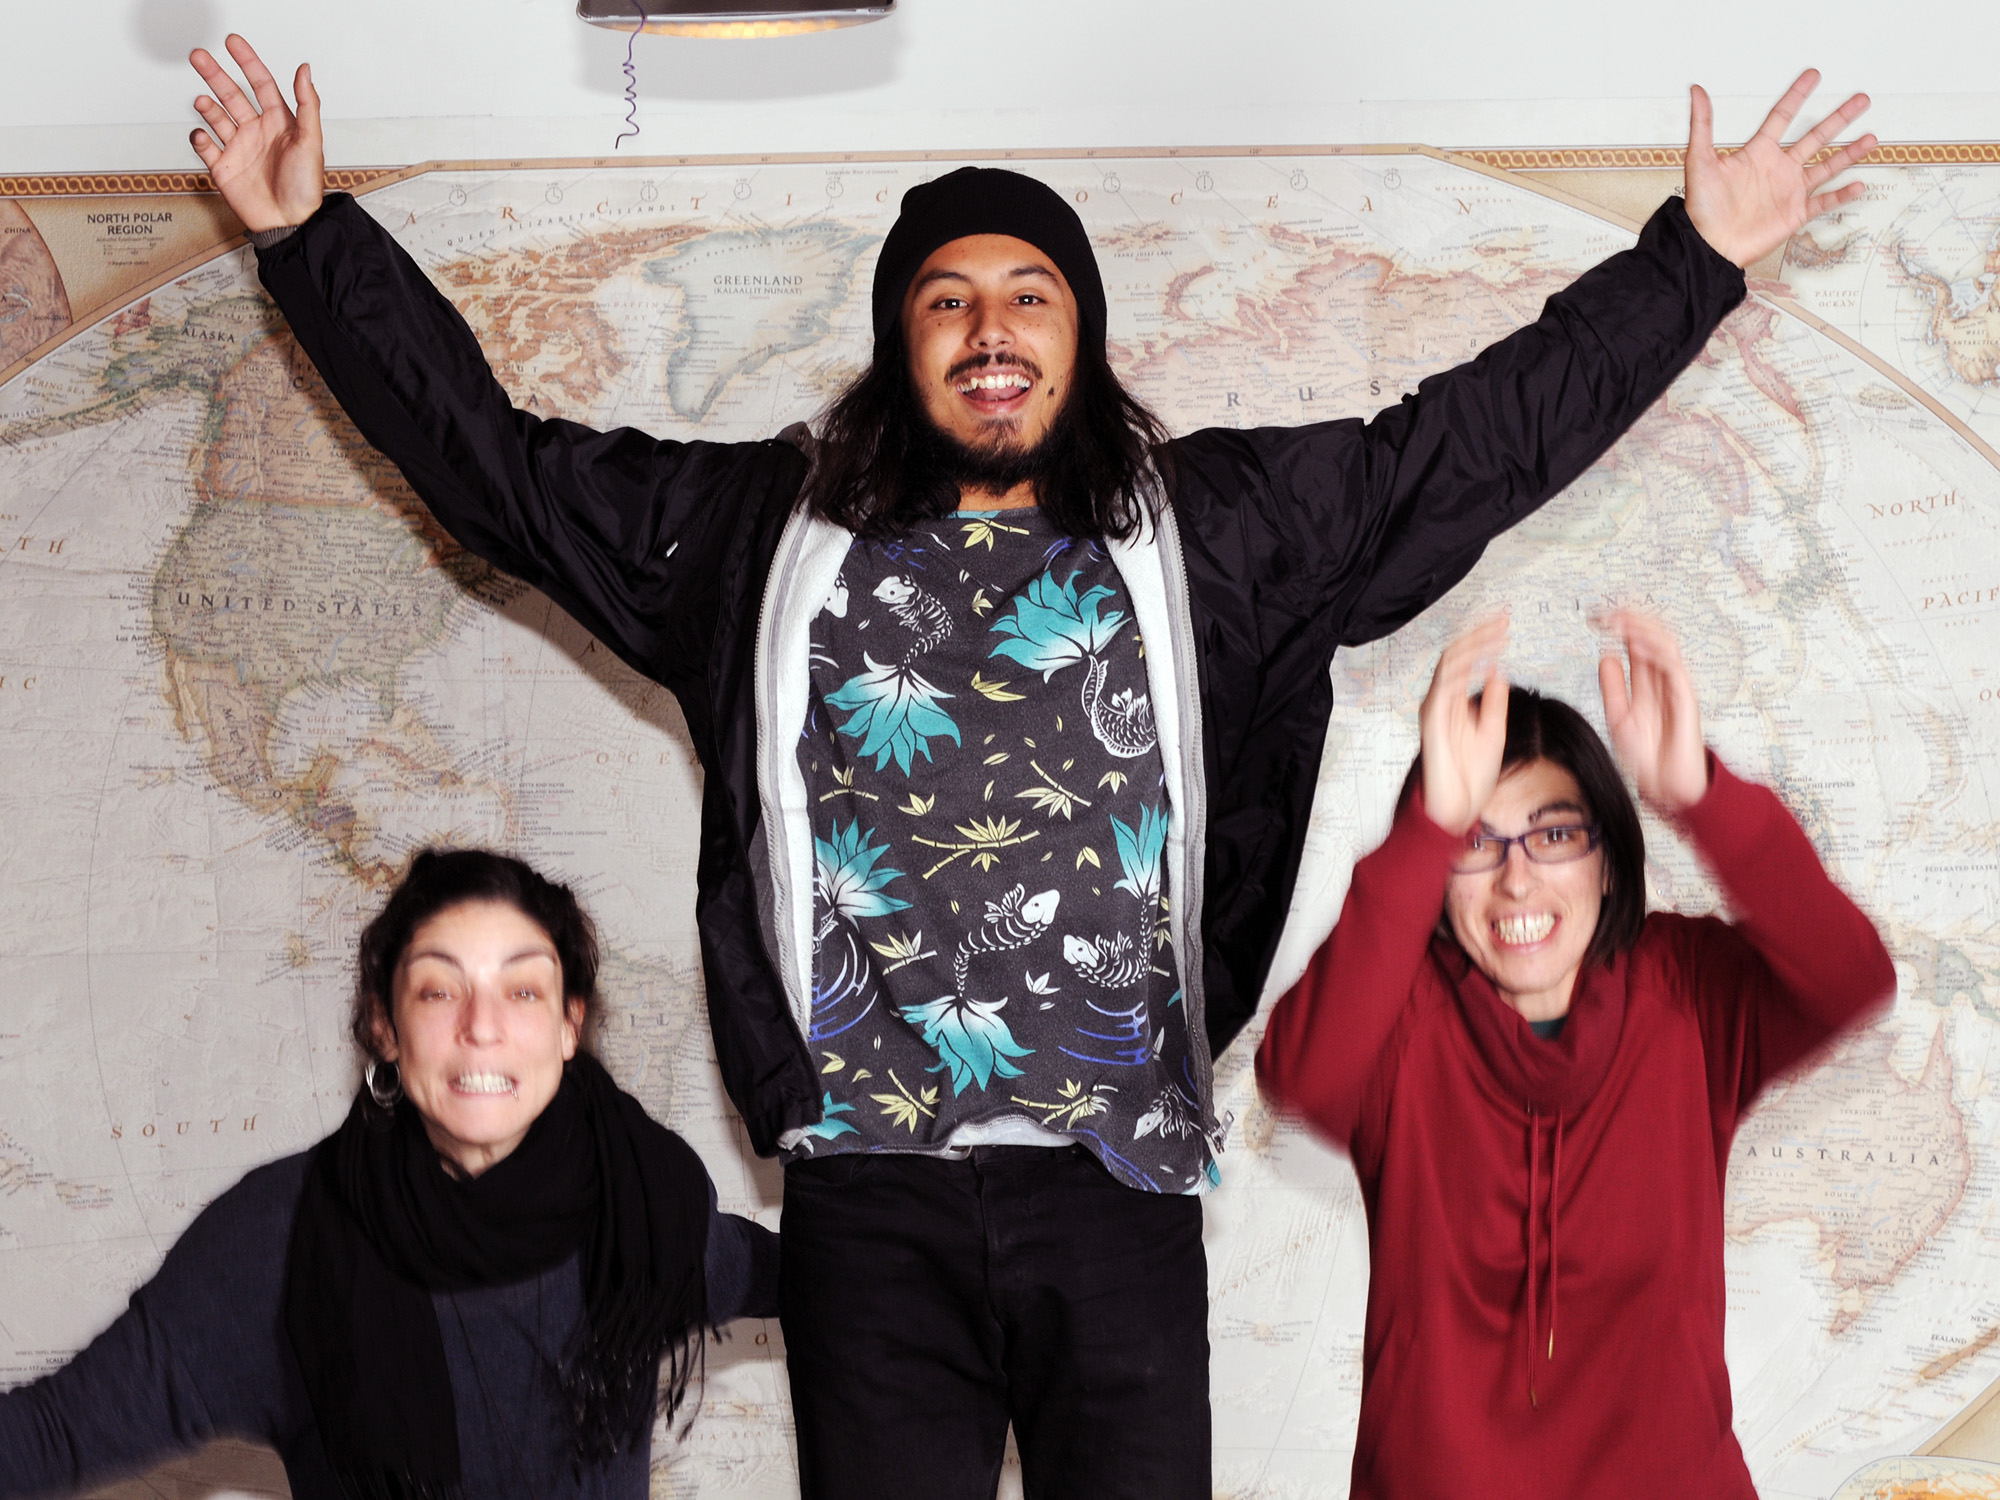 3 people jumping in front of a world map